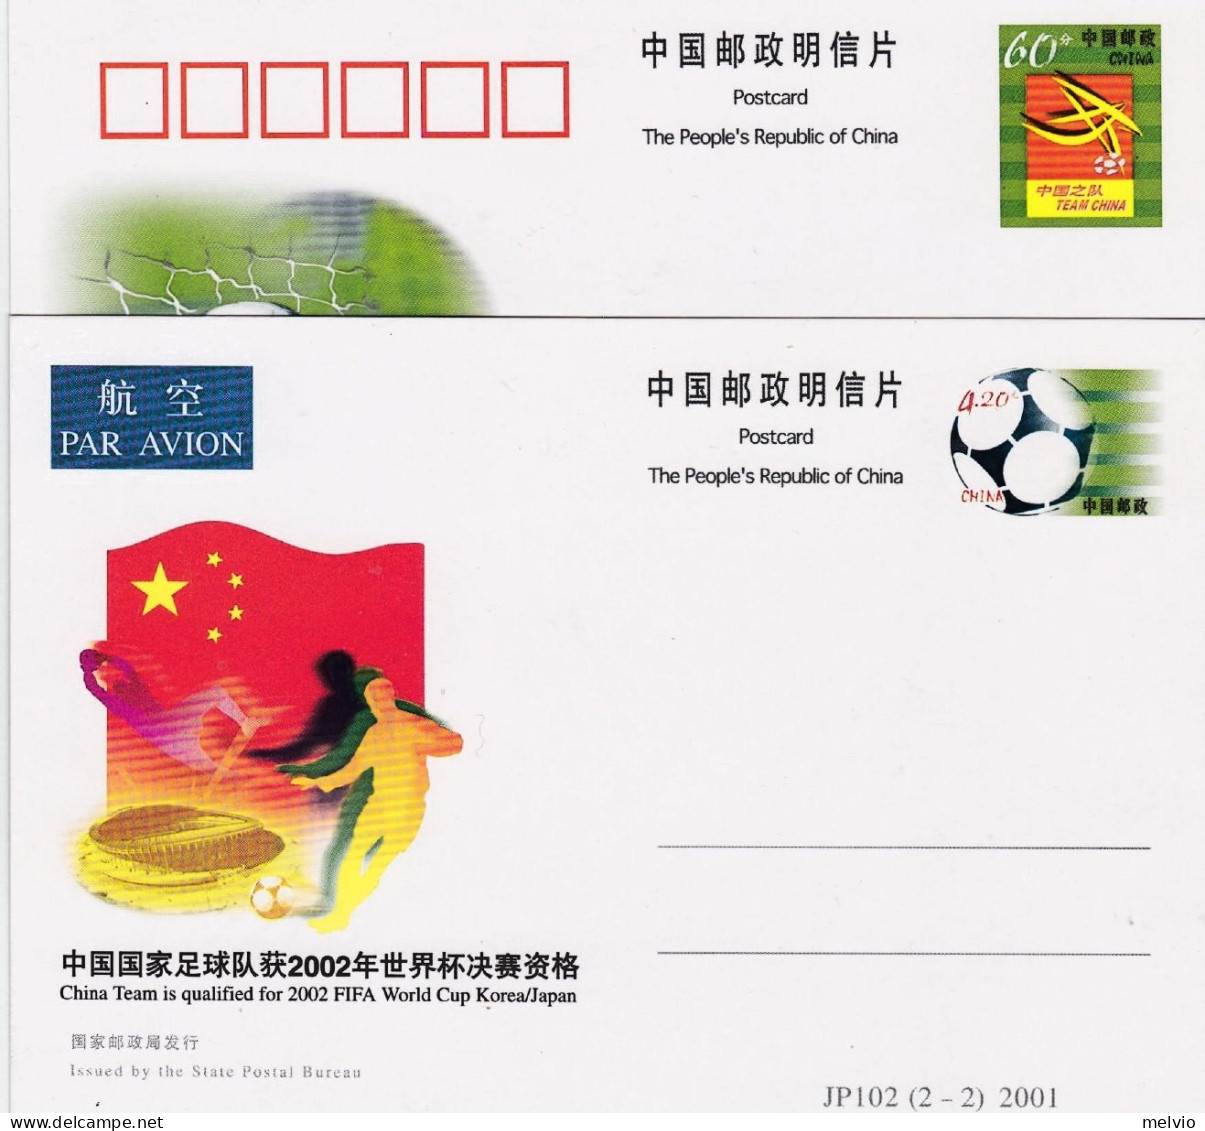 2002-Cina China Chinese Soccer Team Qualifies For 2002 World Cup - Covers & Documents